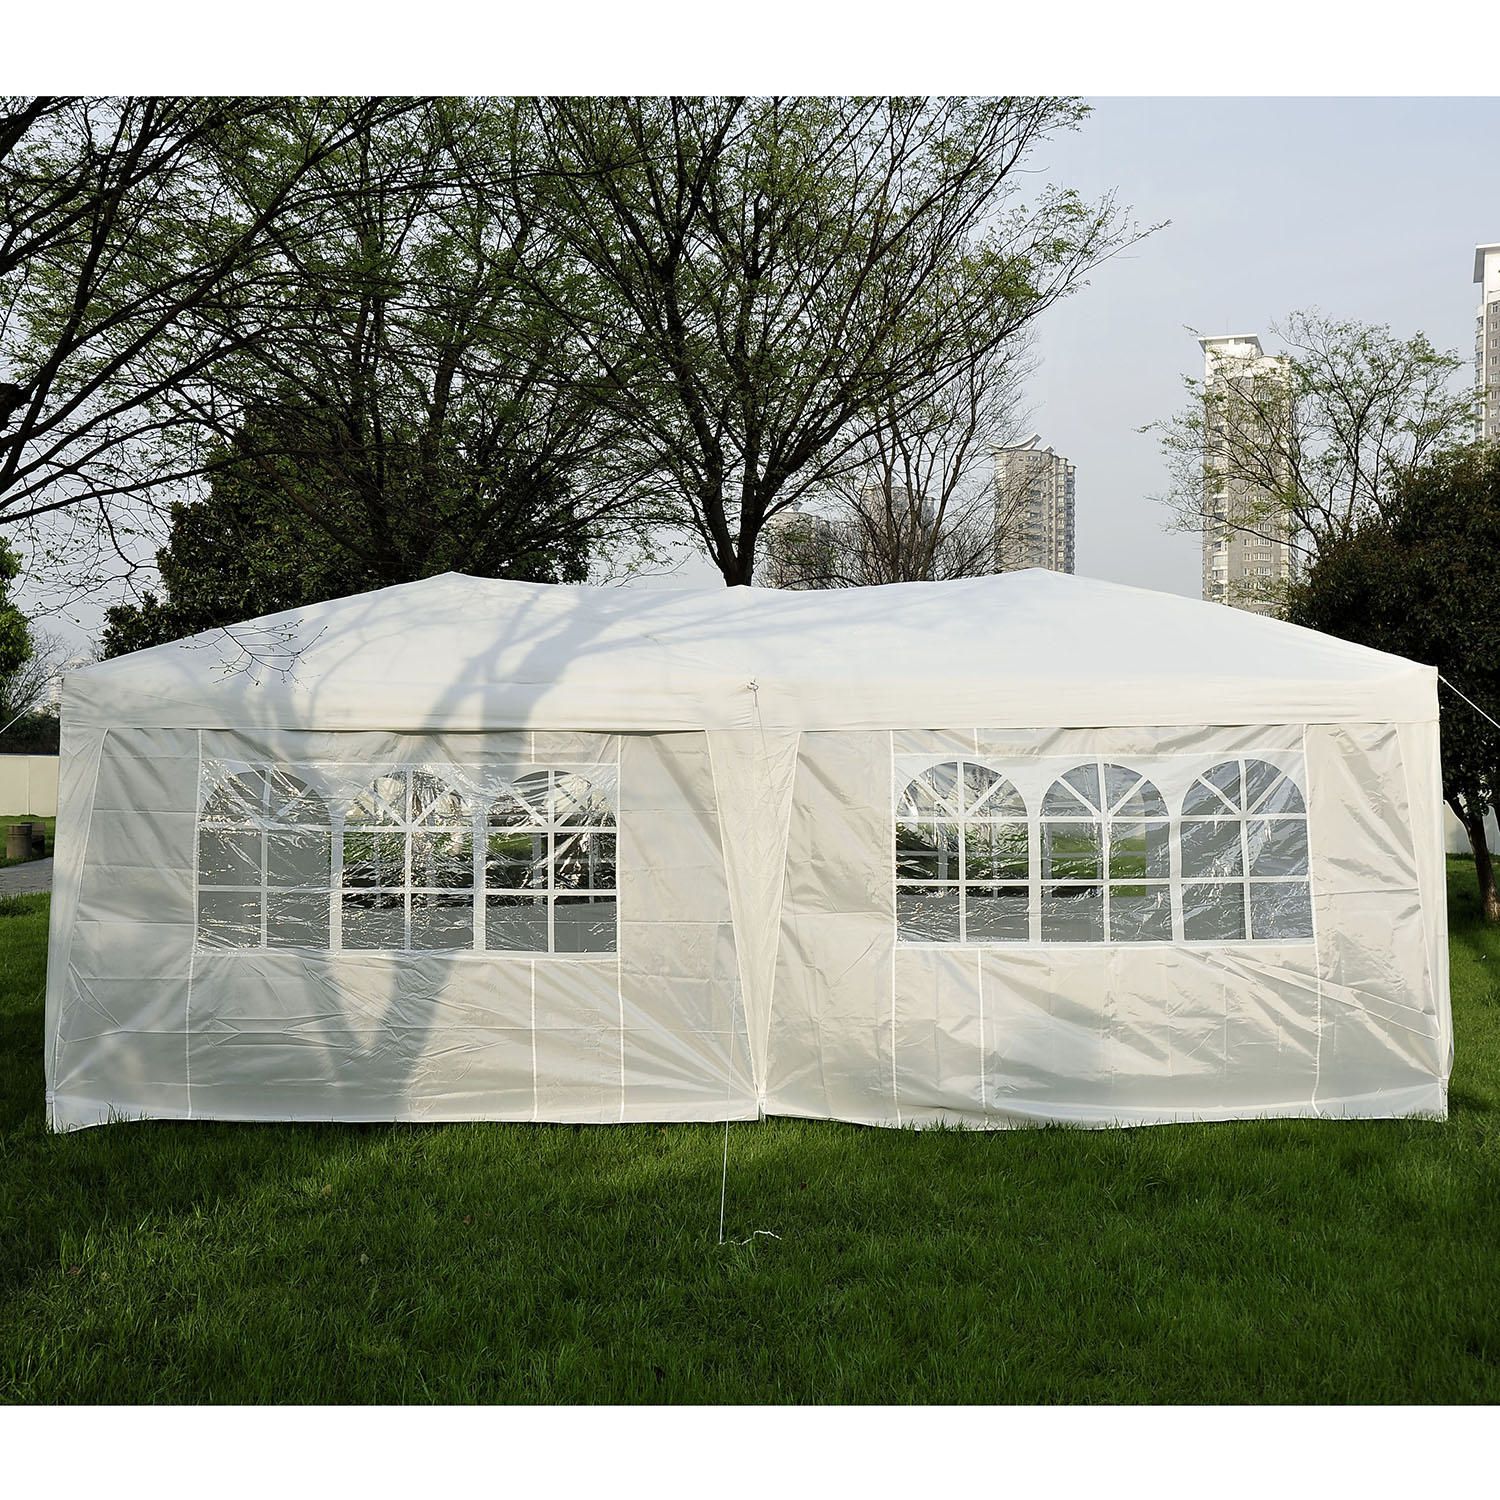 Outsunny 10’x20’ Folding Pop up Party Tent with 6 Sidewalls | Walmart ...
